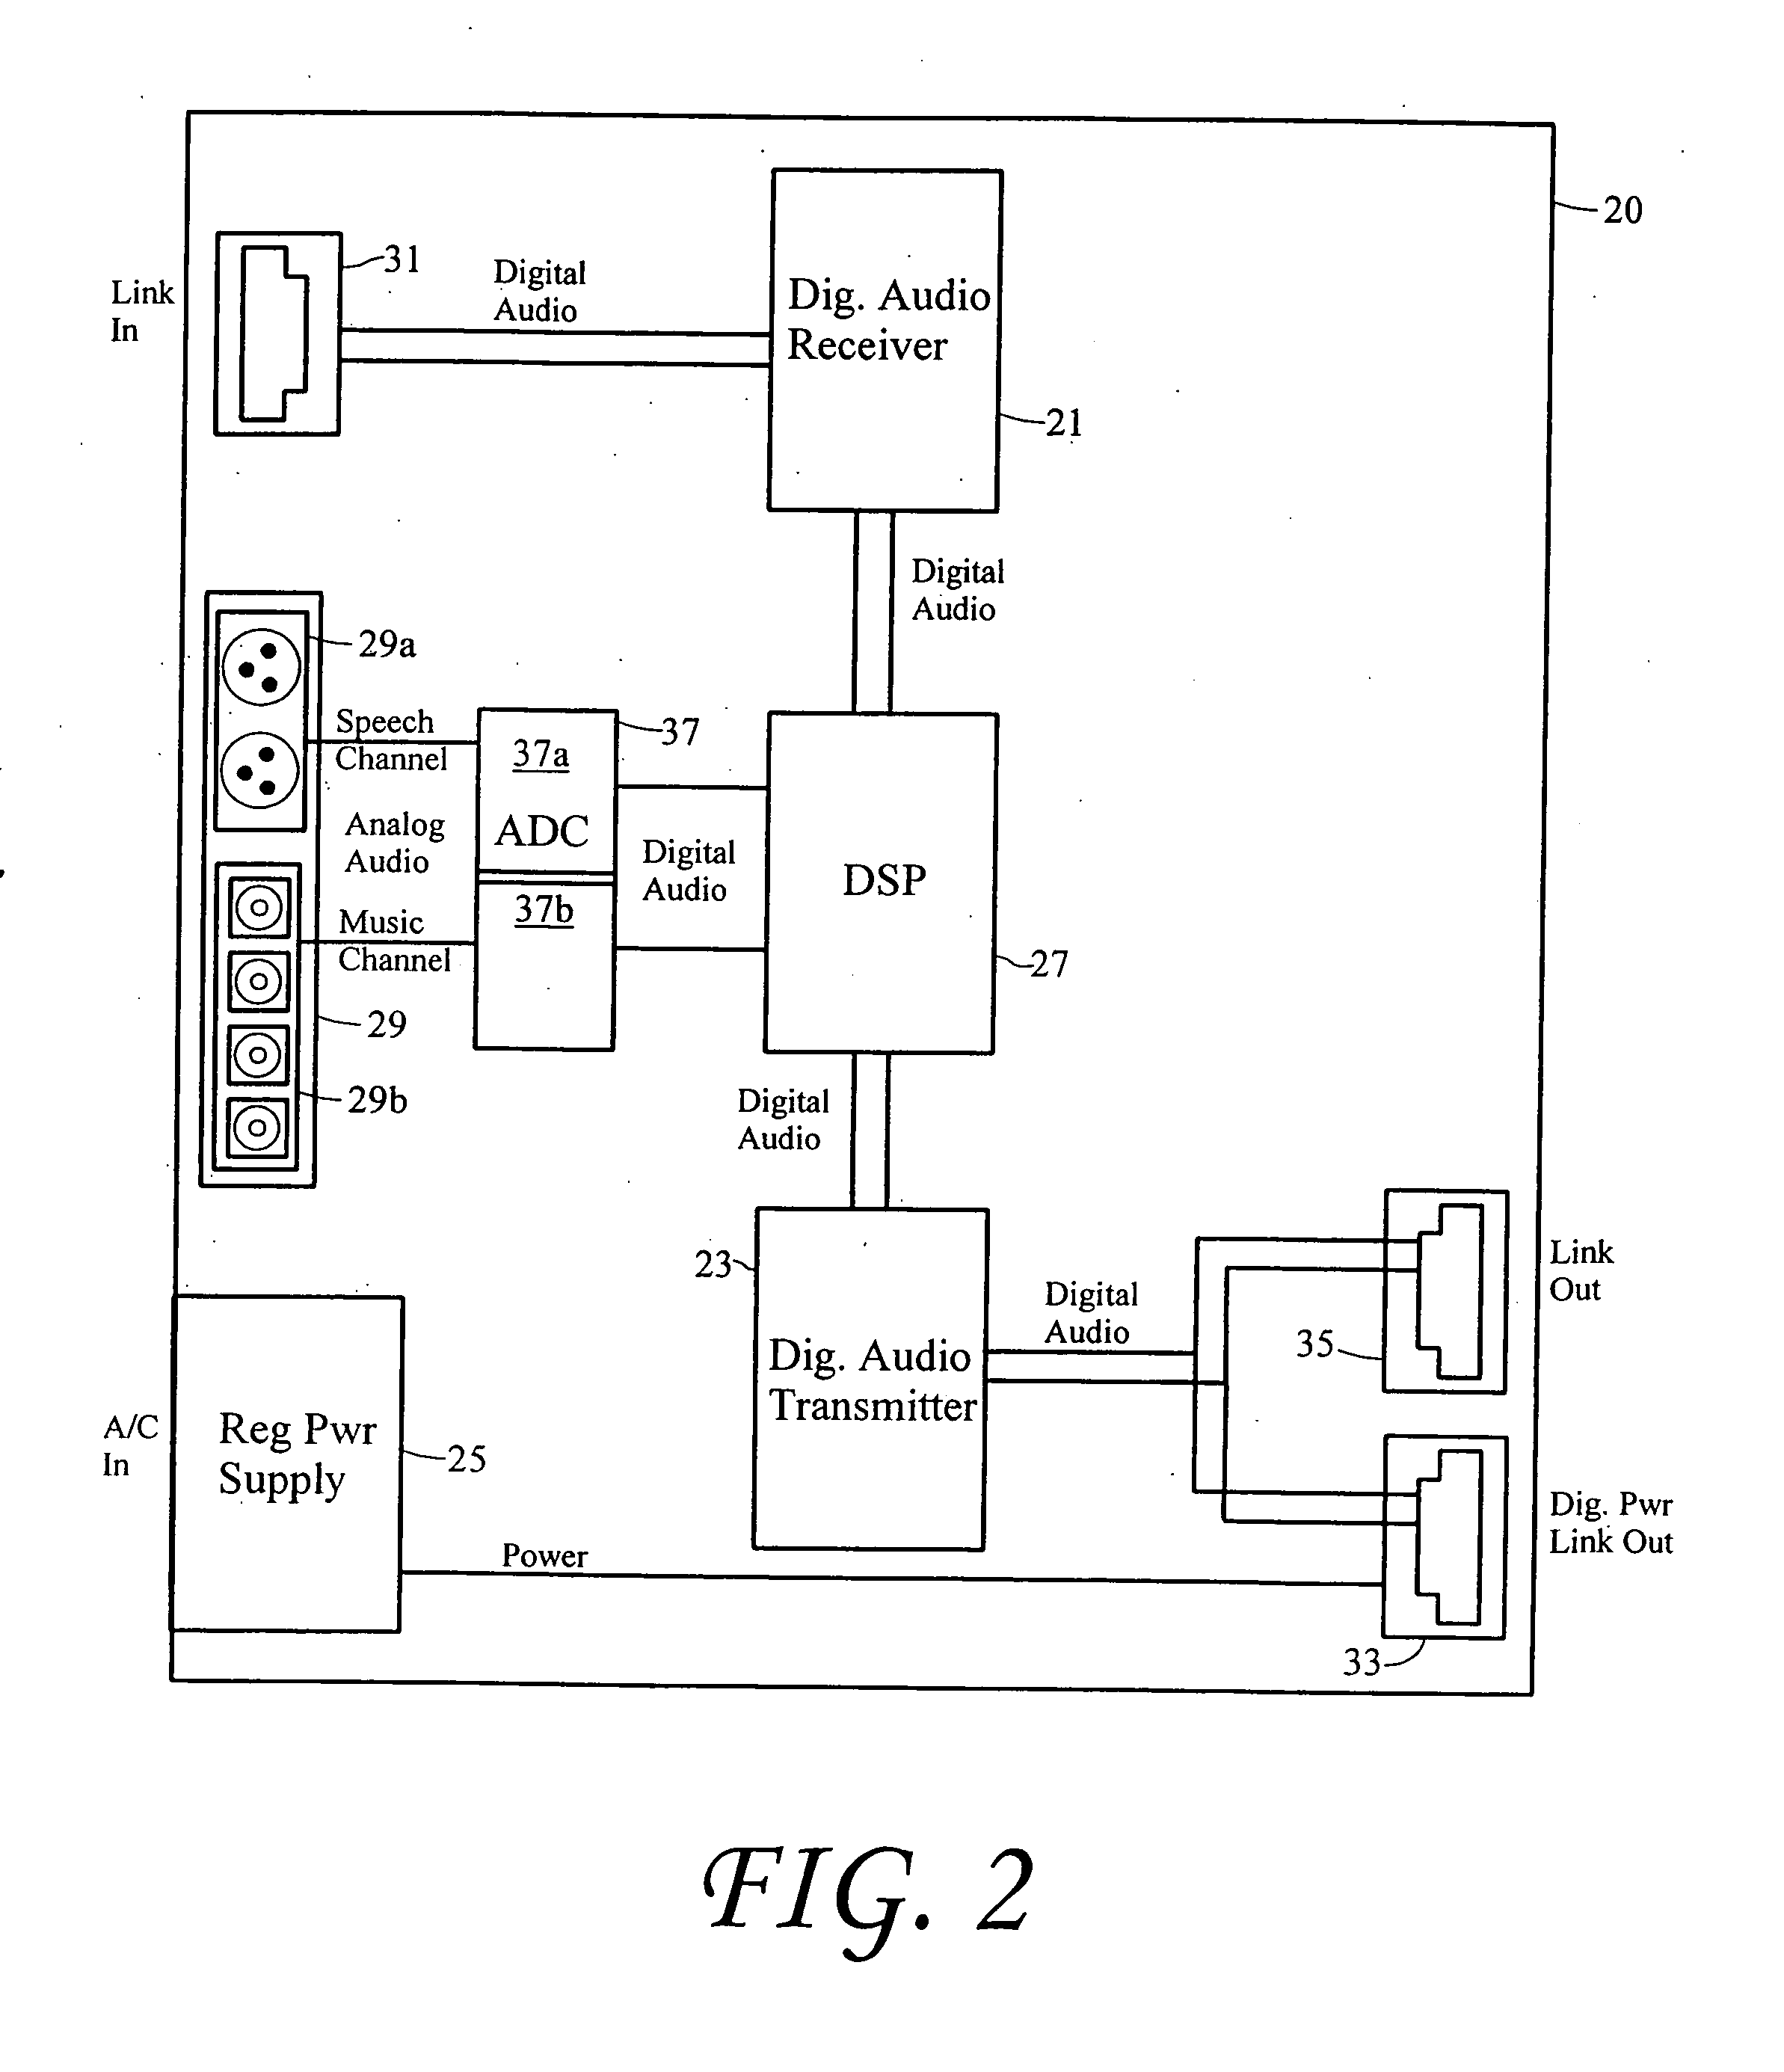 Digital power link audio distribution system and components thereof